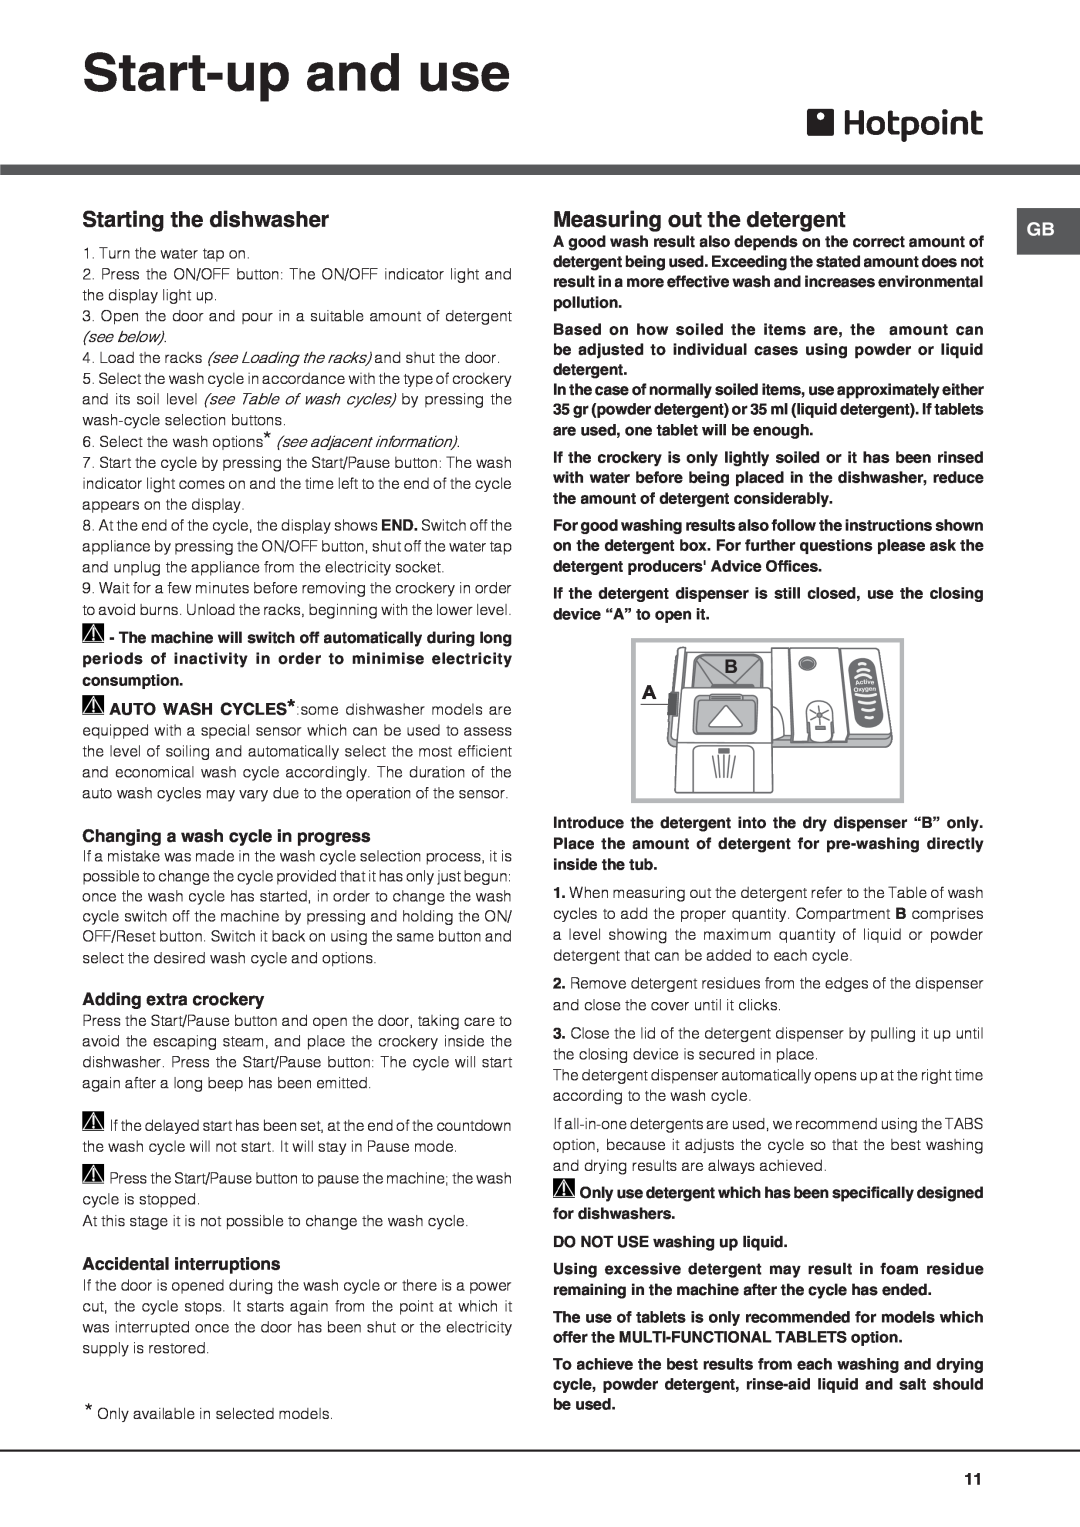 Hotpoint FDYF 11011 Style manual Start-upand use, Changing a wash cycle in progress, Adding extra crockery, see below 